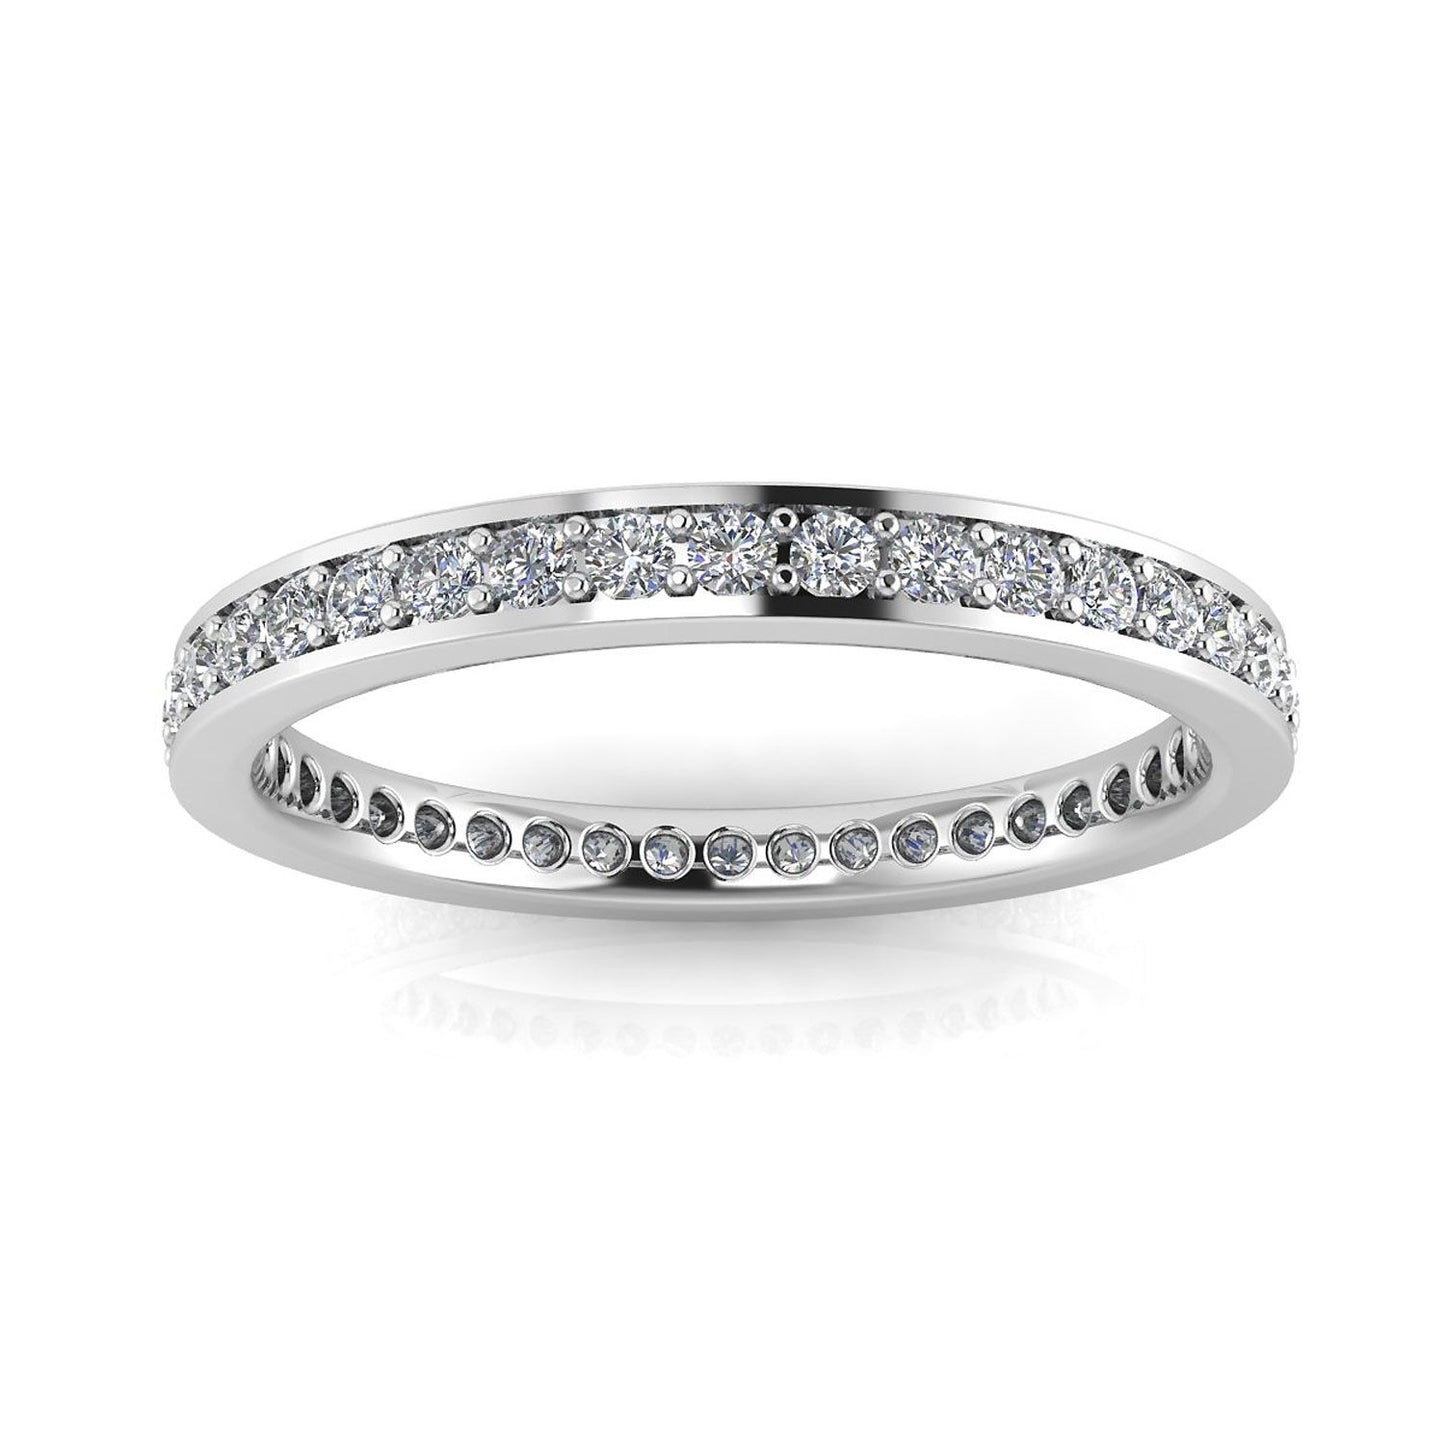 Round Brilliant Cut Diamond Channel Pave Set Eternity Ring In 18k White Gold  (0.35ct. Tw.) Ring Size 8.5